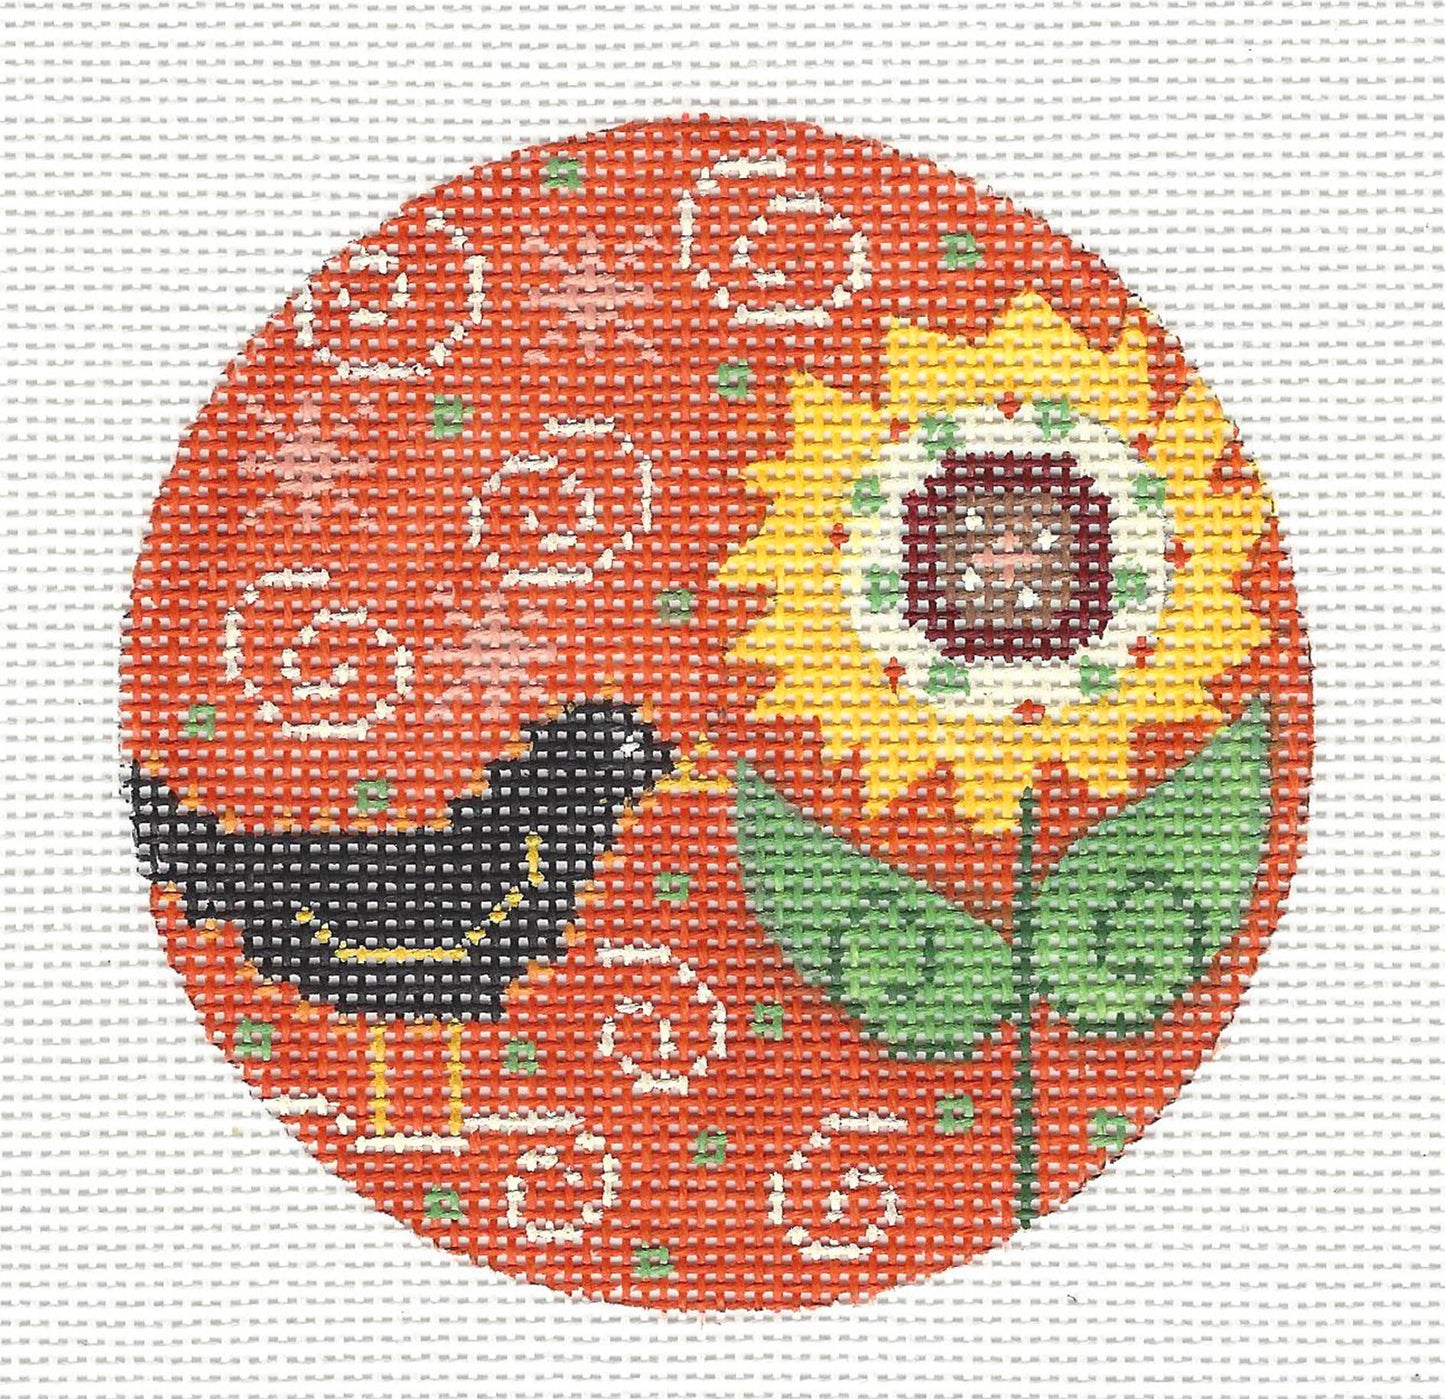 Round ~ Black Crow and Sunflower 3.5" Ornament on handpainted Needlepoint Canvas by CH Designs from Danji